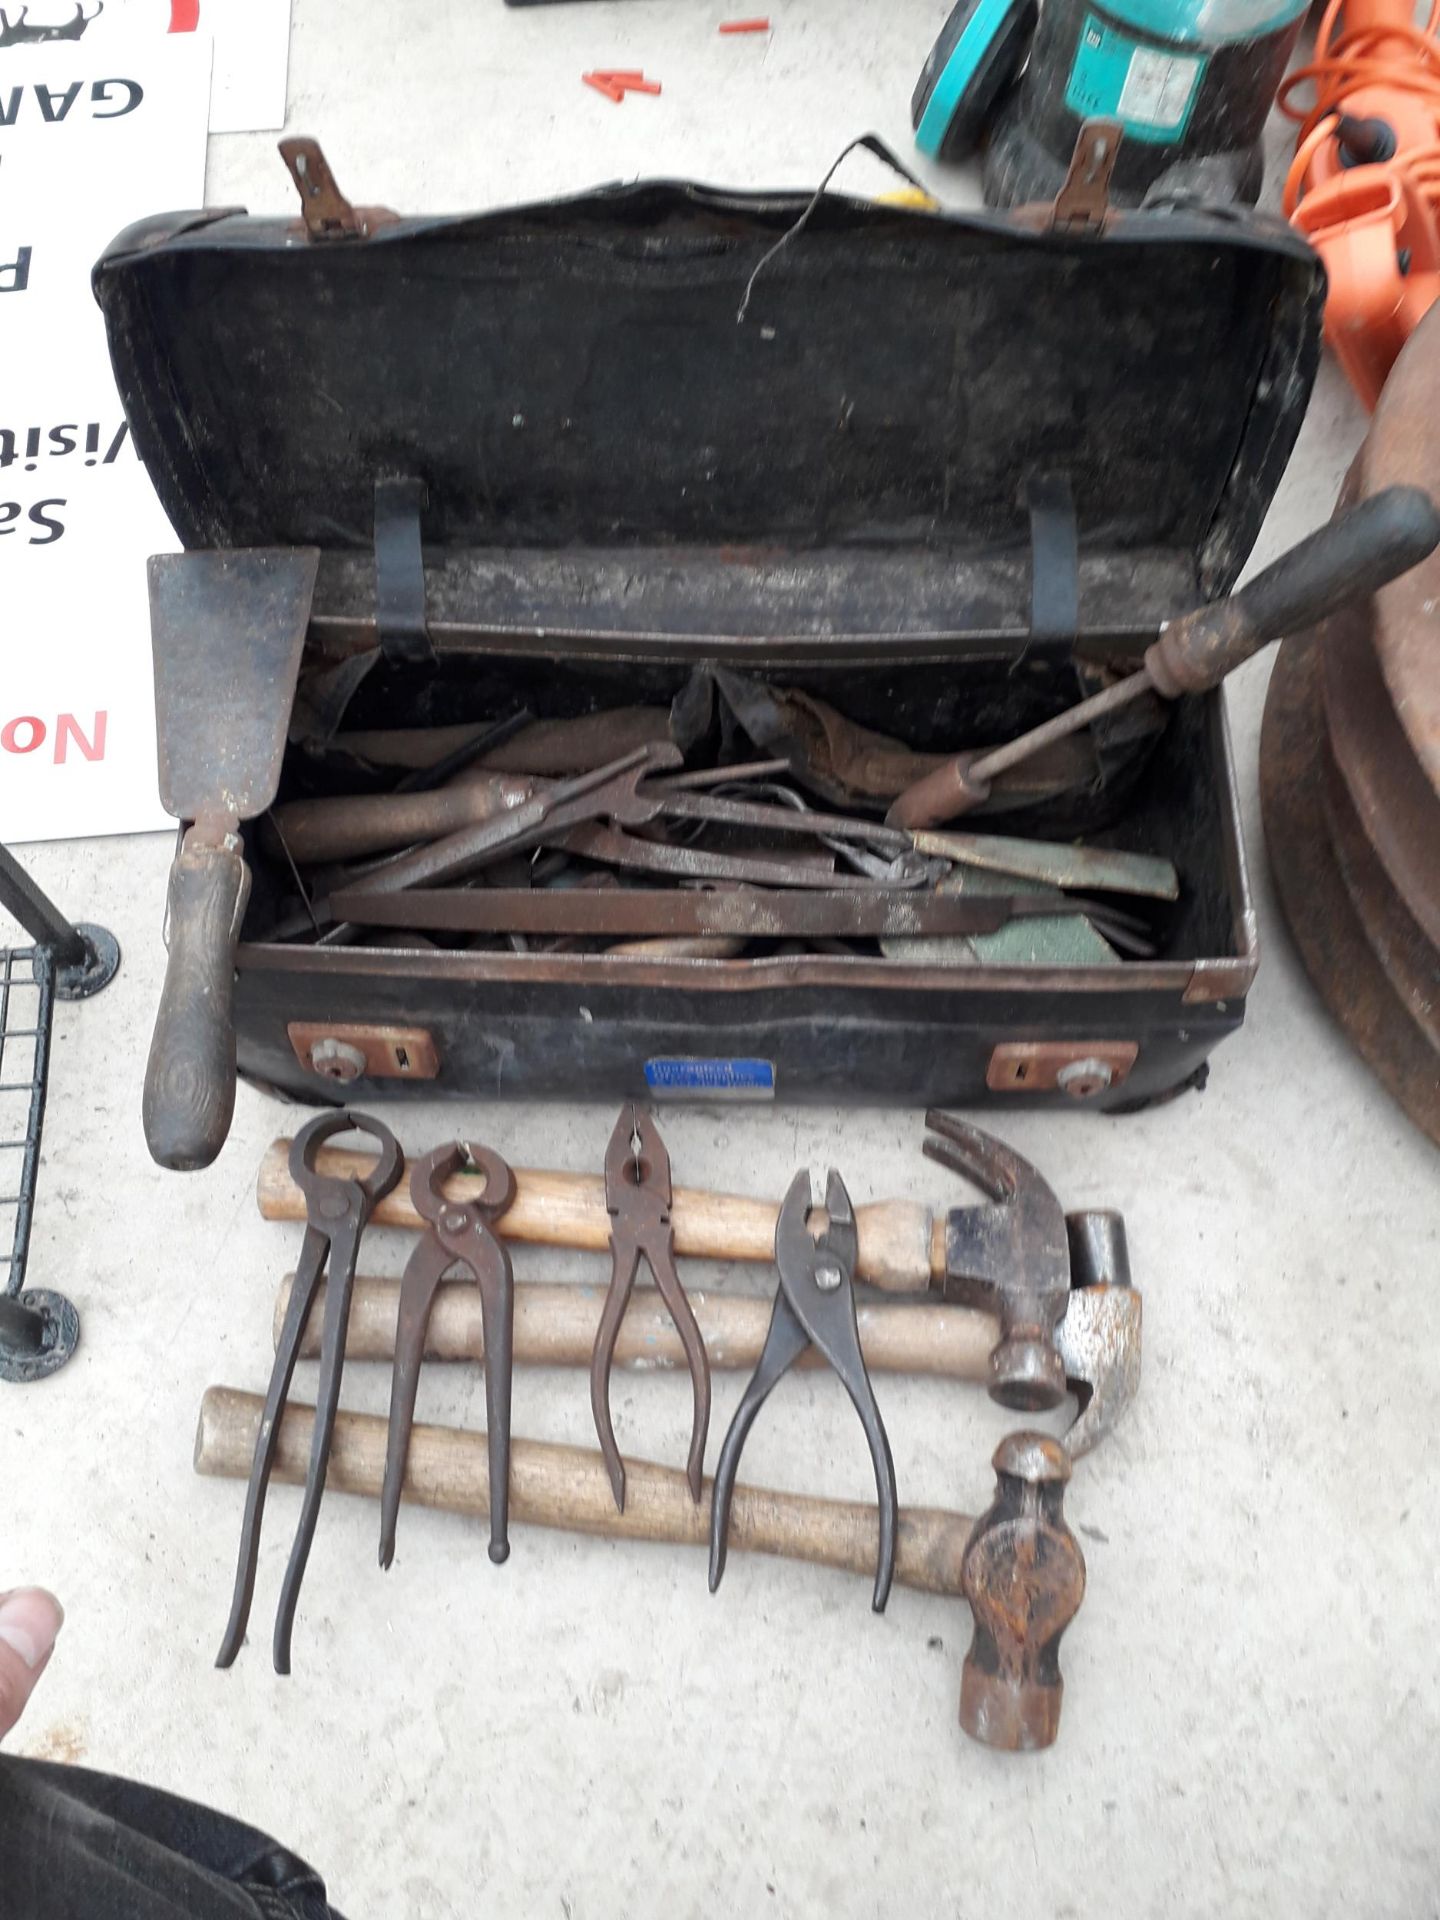 A TOOL BAG CONTAINING VARIOUS HAMMERS, SPANNERS, ETC